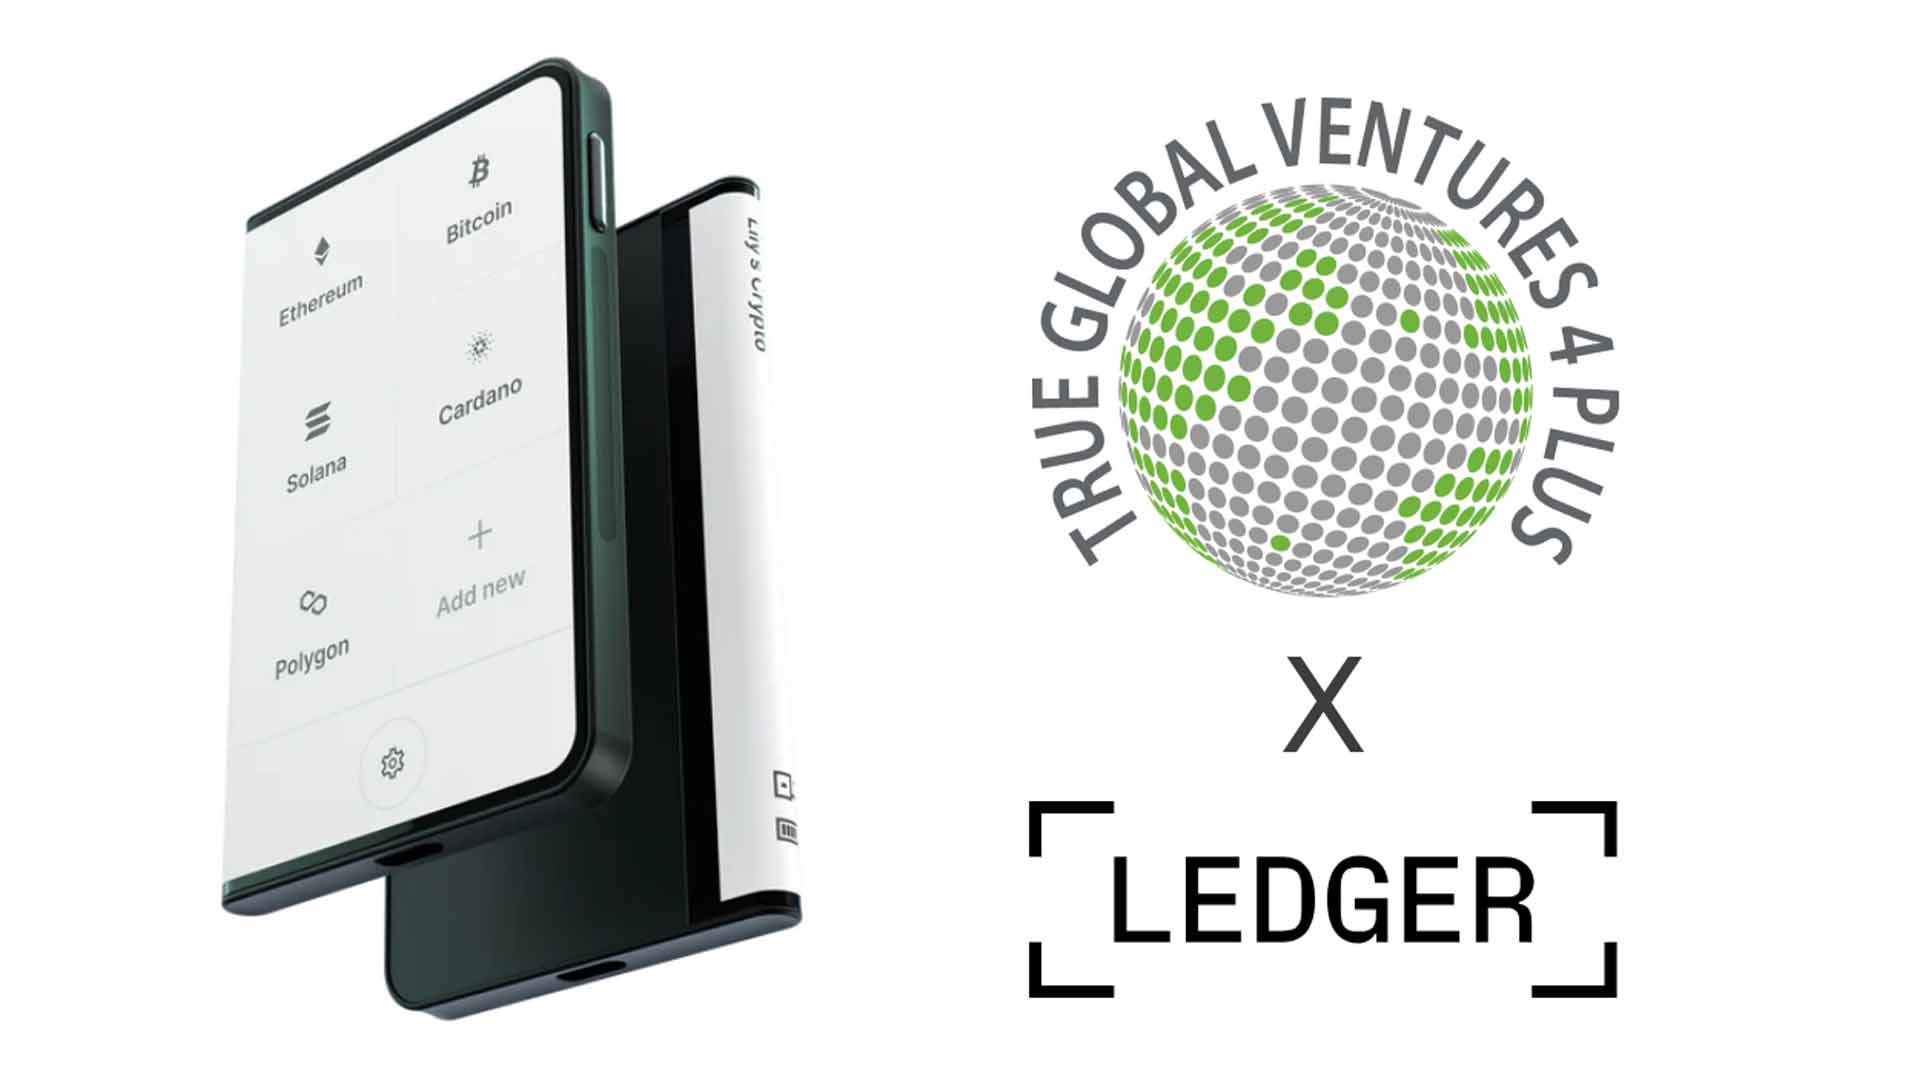 True Global Ventures Invests Over 24 Million USD in Ledger As It Accelerates Plans To Bring Digital Asset Security To The Masses